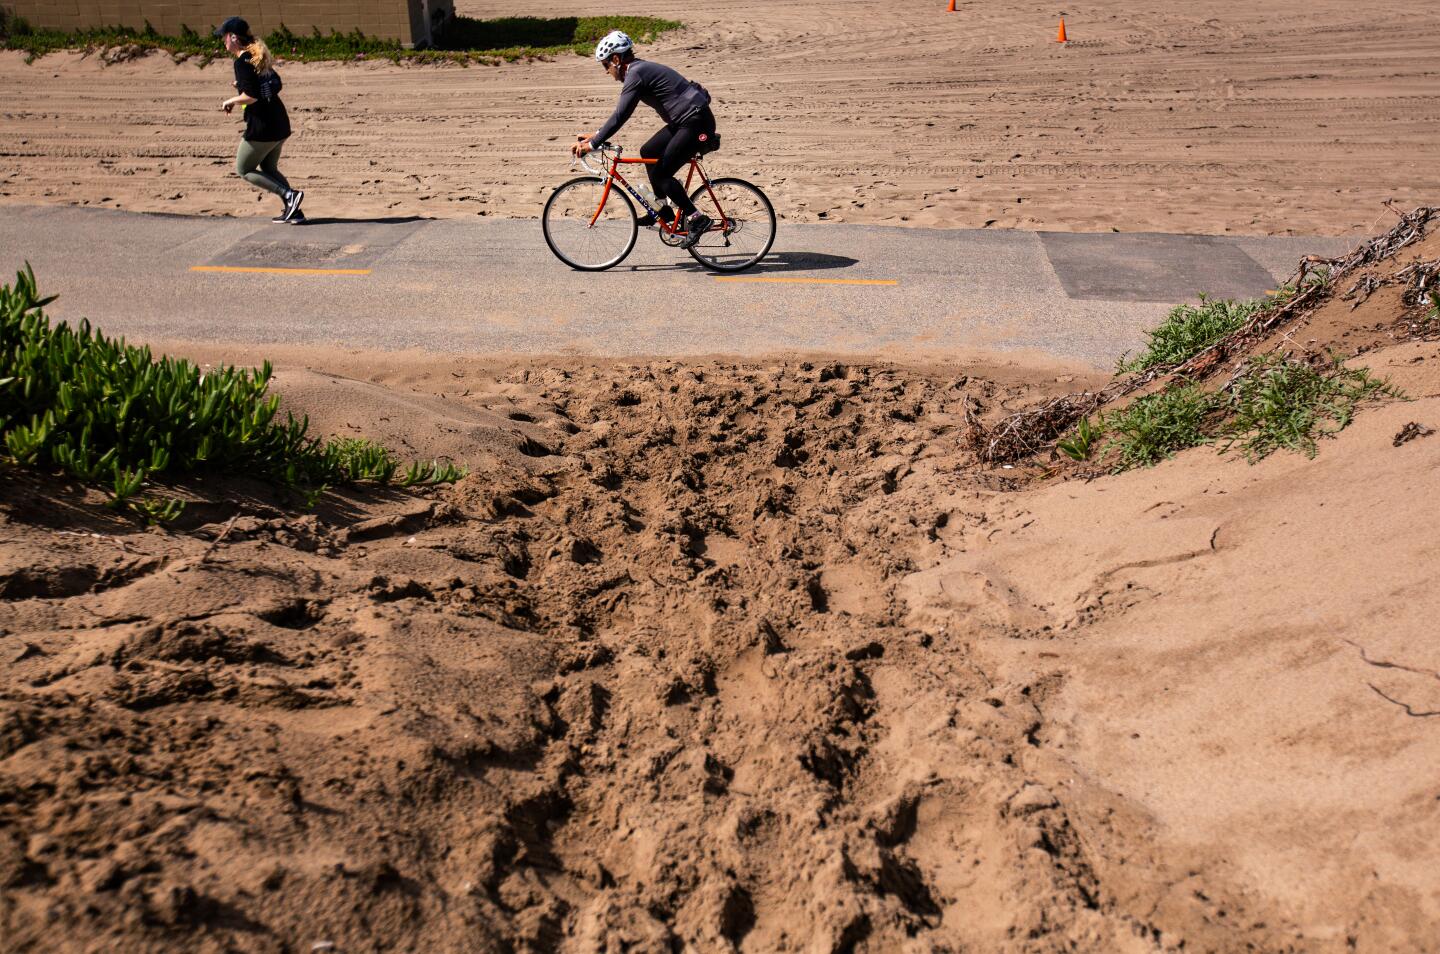 A woman jogs and a man bikes at Dockweiler State Beach on March 15 in Los Angeles. Dockweiler Beach RV Park will temporarily house individuals who may have been ordered to isolate or quarantine by the Department of Public Health due to the novel coronavirus.